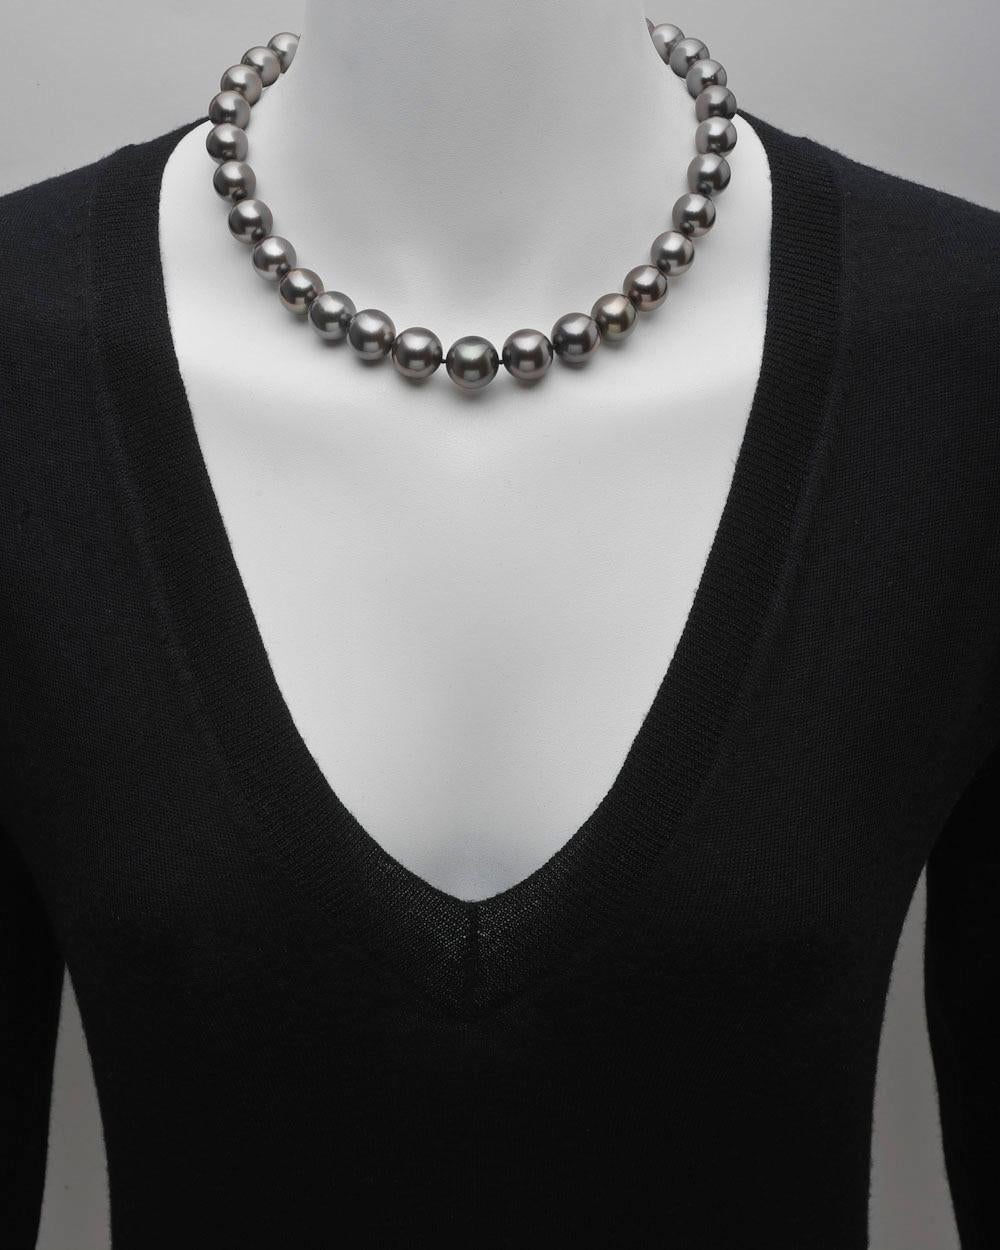 Single strand black pearl necklace, composed of 33 cultured pearls ranging from 14.8 to 12mm in diameter and strung on a silk cord, secured by a diamond and platinum ball clasp pavé-set with approximately 4.98 total carats of diamonds. 18.5